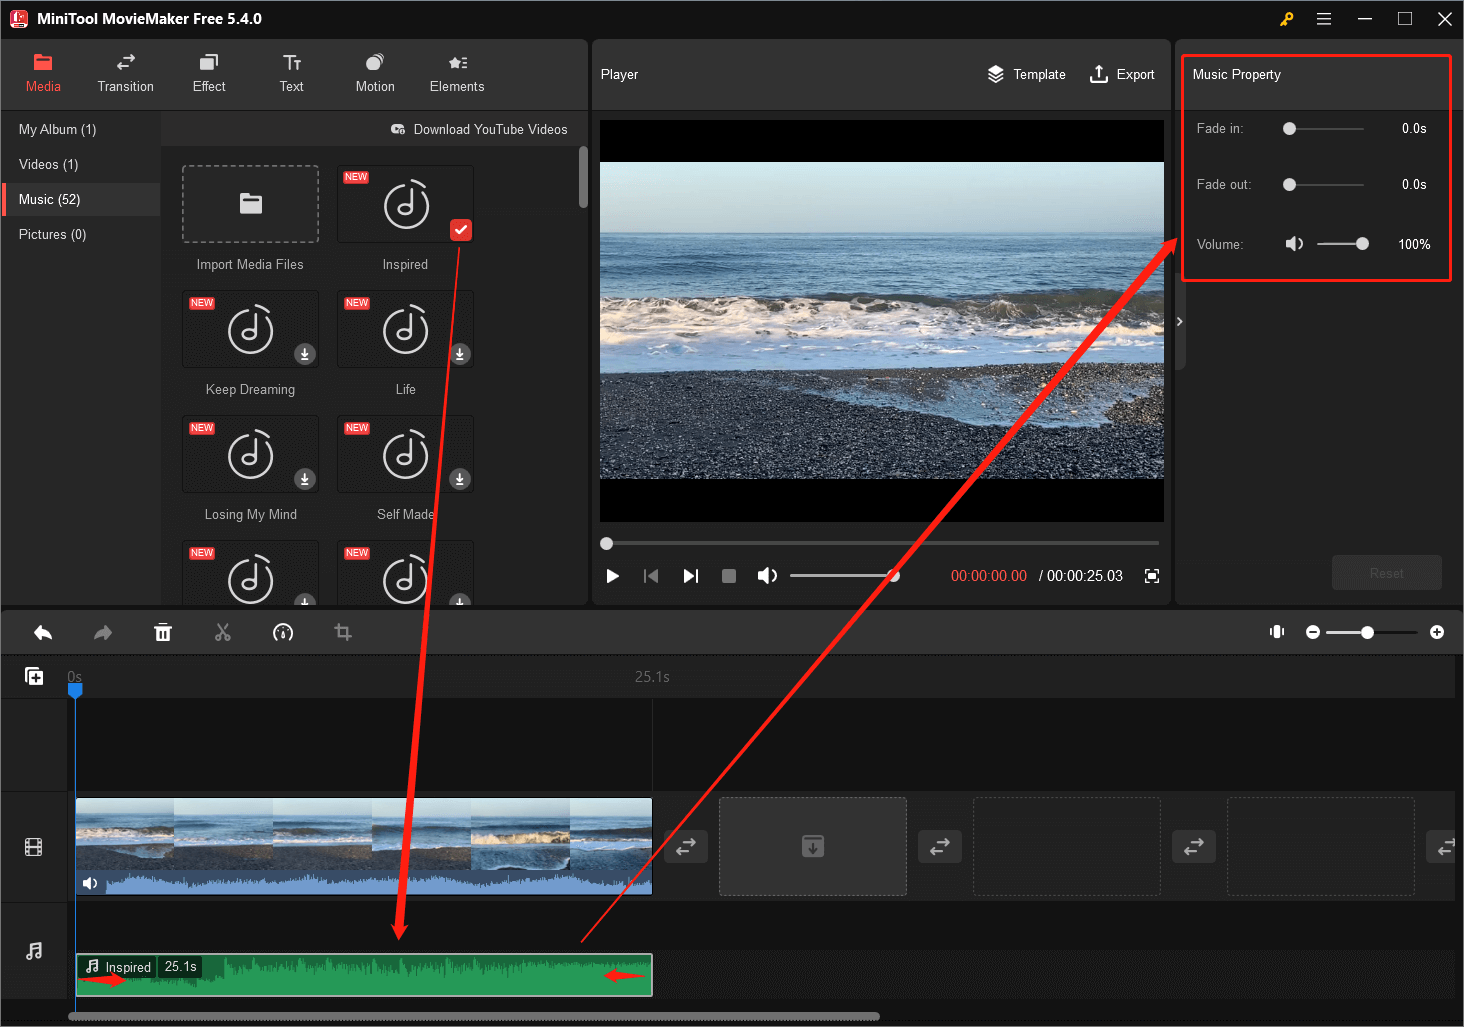 add and edit sound to the video